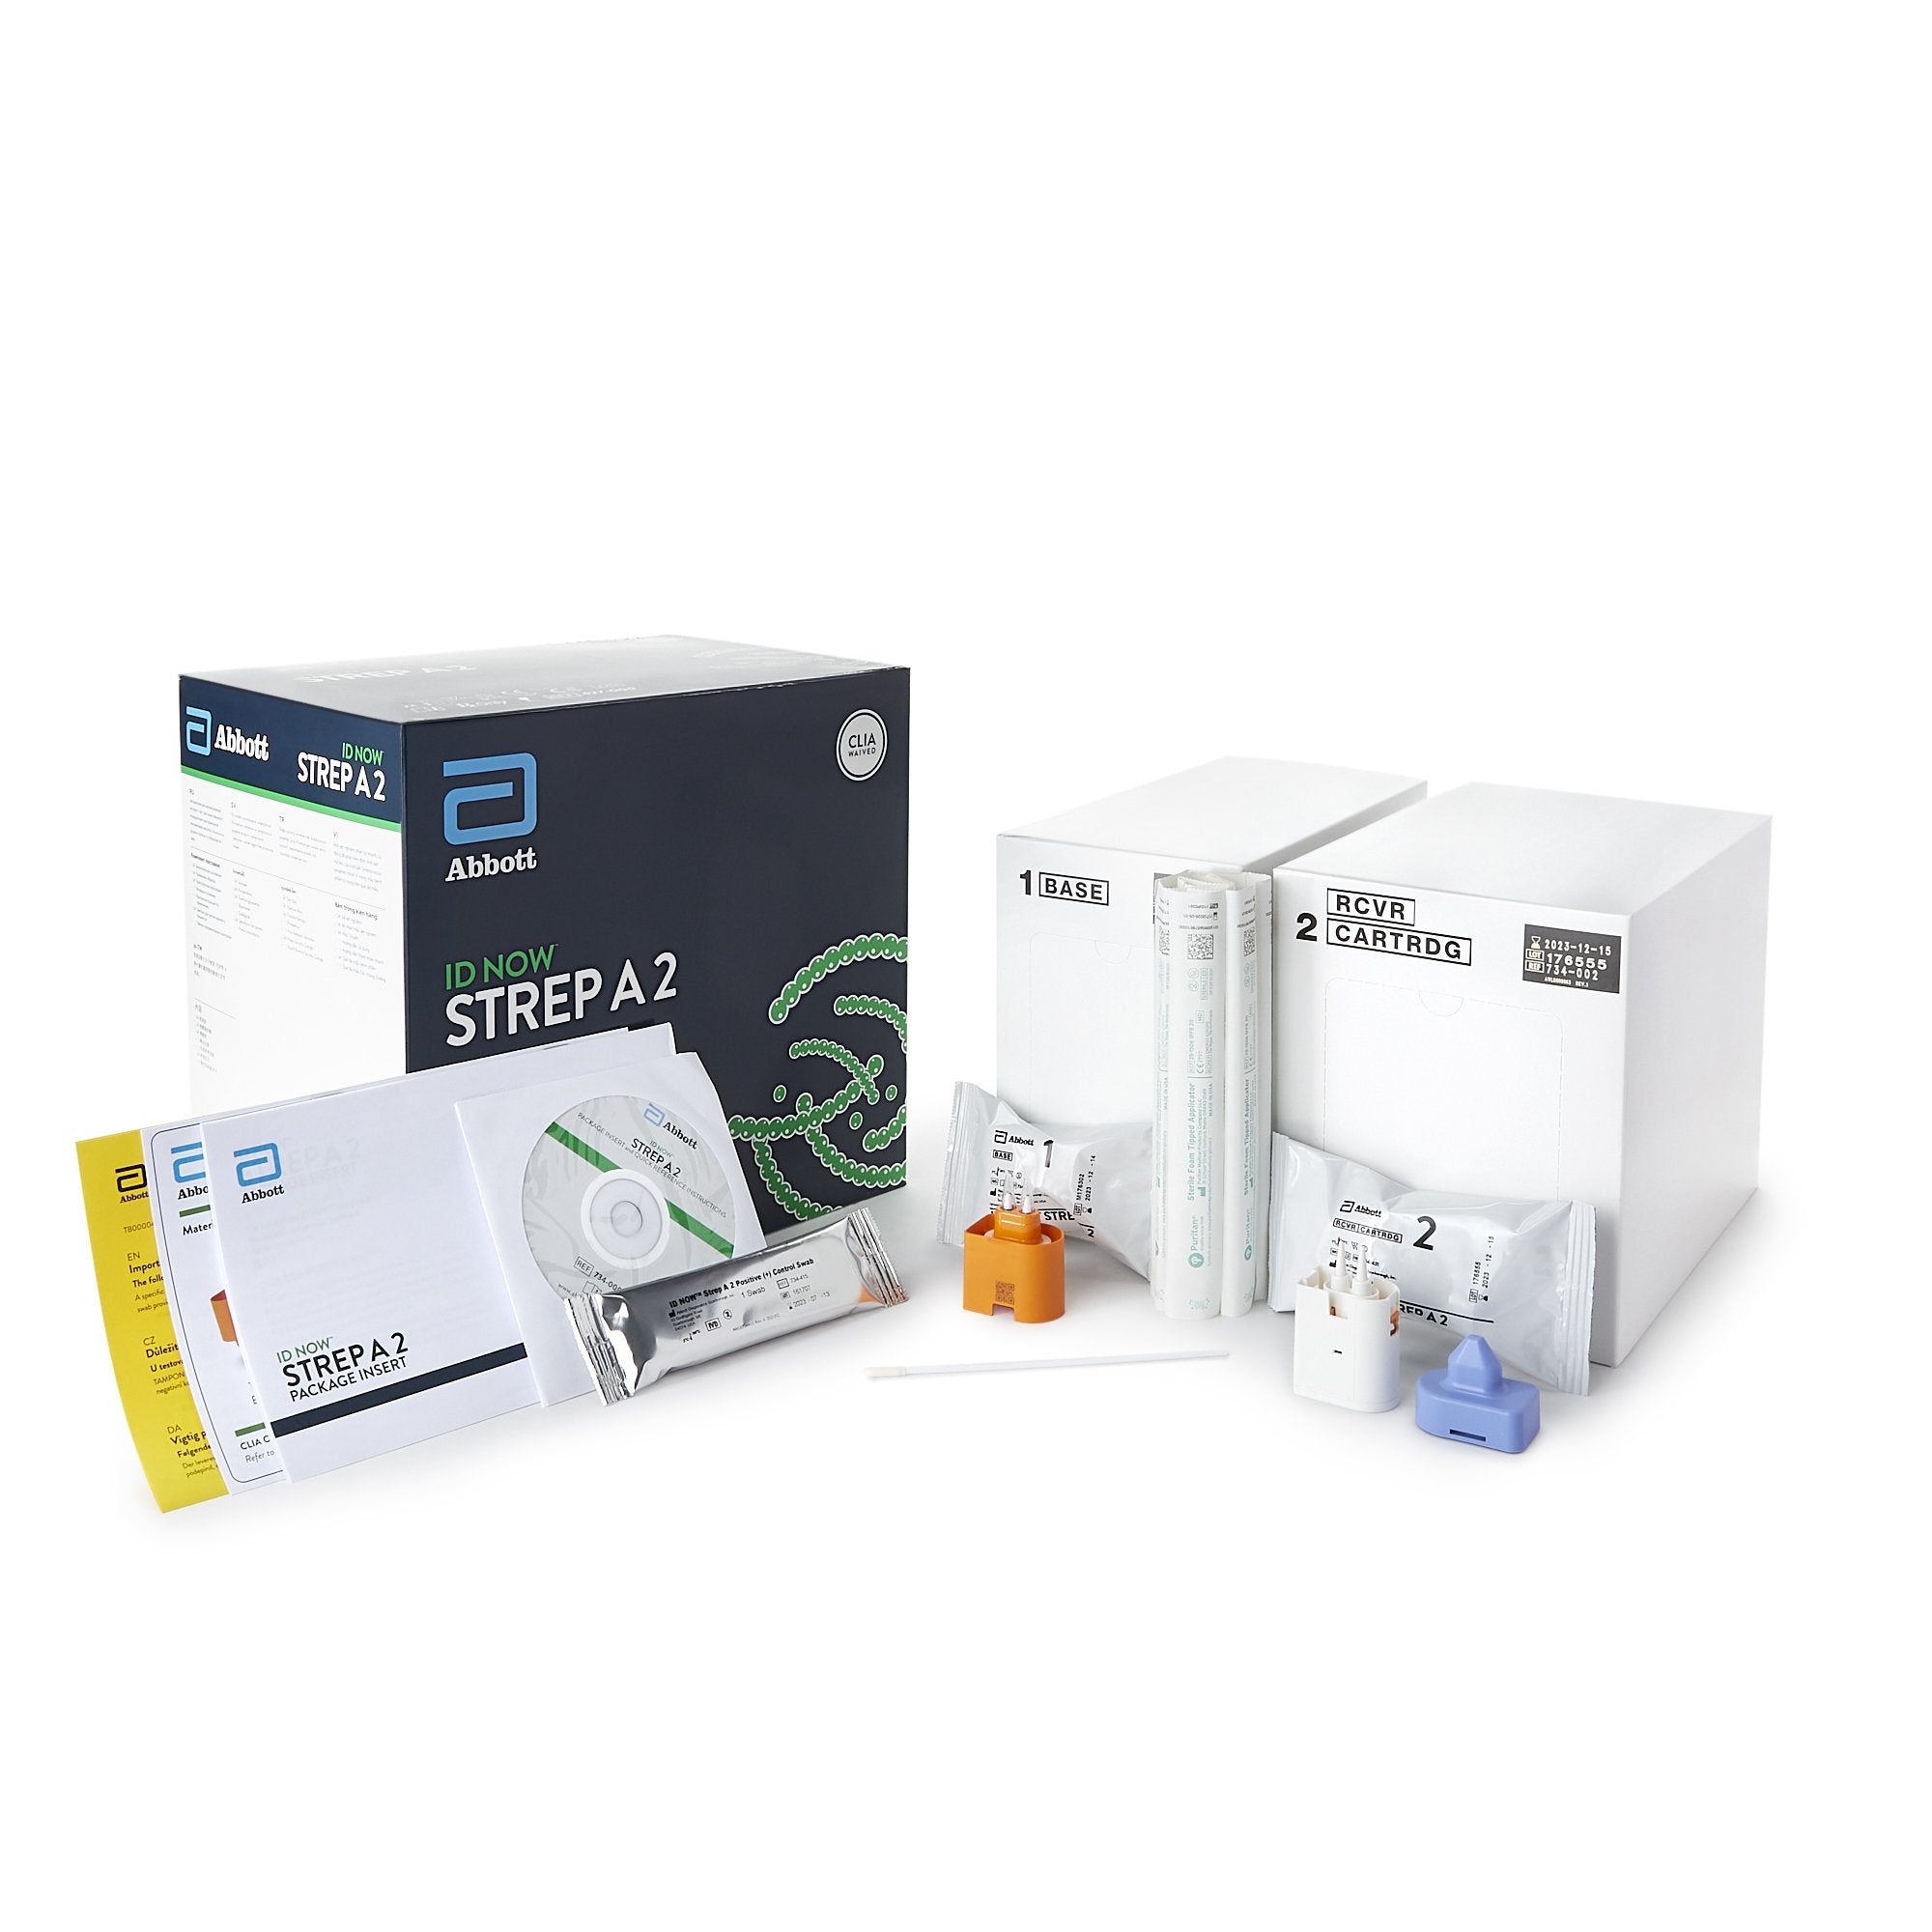 Respiratory Test Kit ID NOW Strep A 2.0 Molecular Diagnostic Strep A Test Throat Swab Sample 24 Tests CLIA Waived